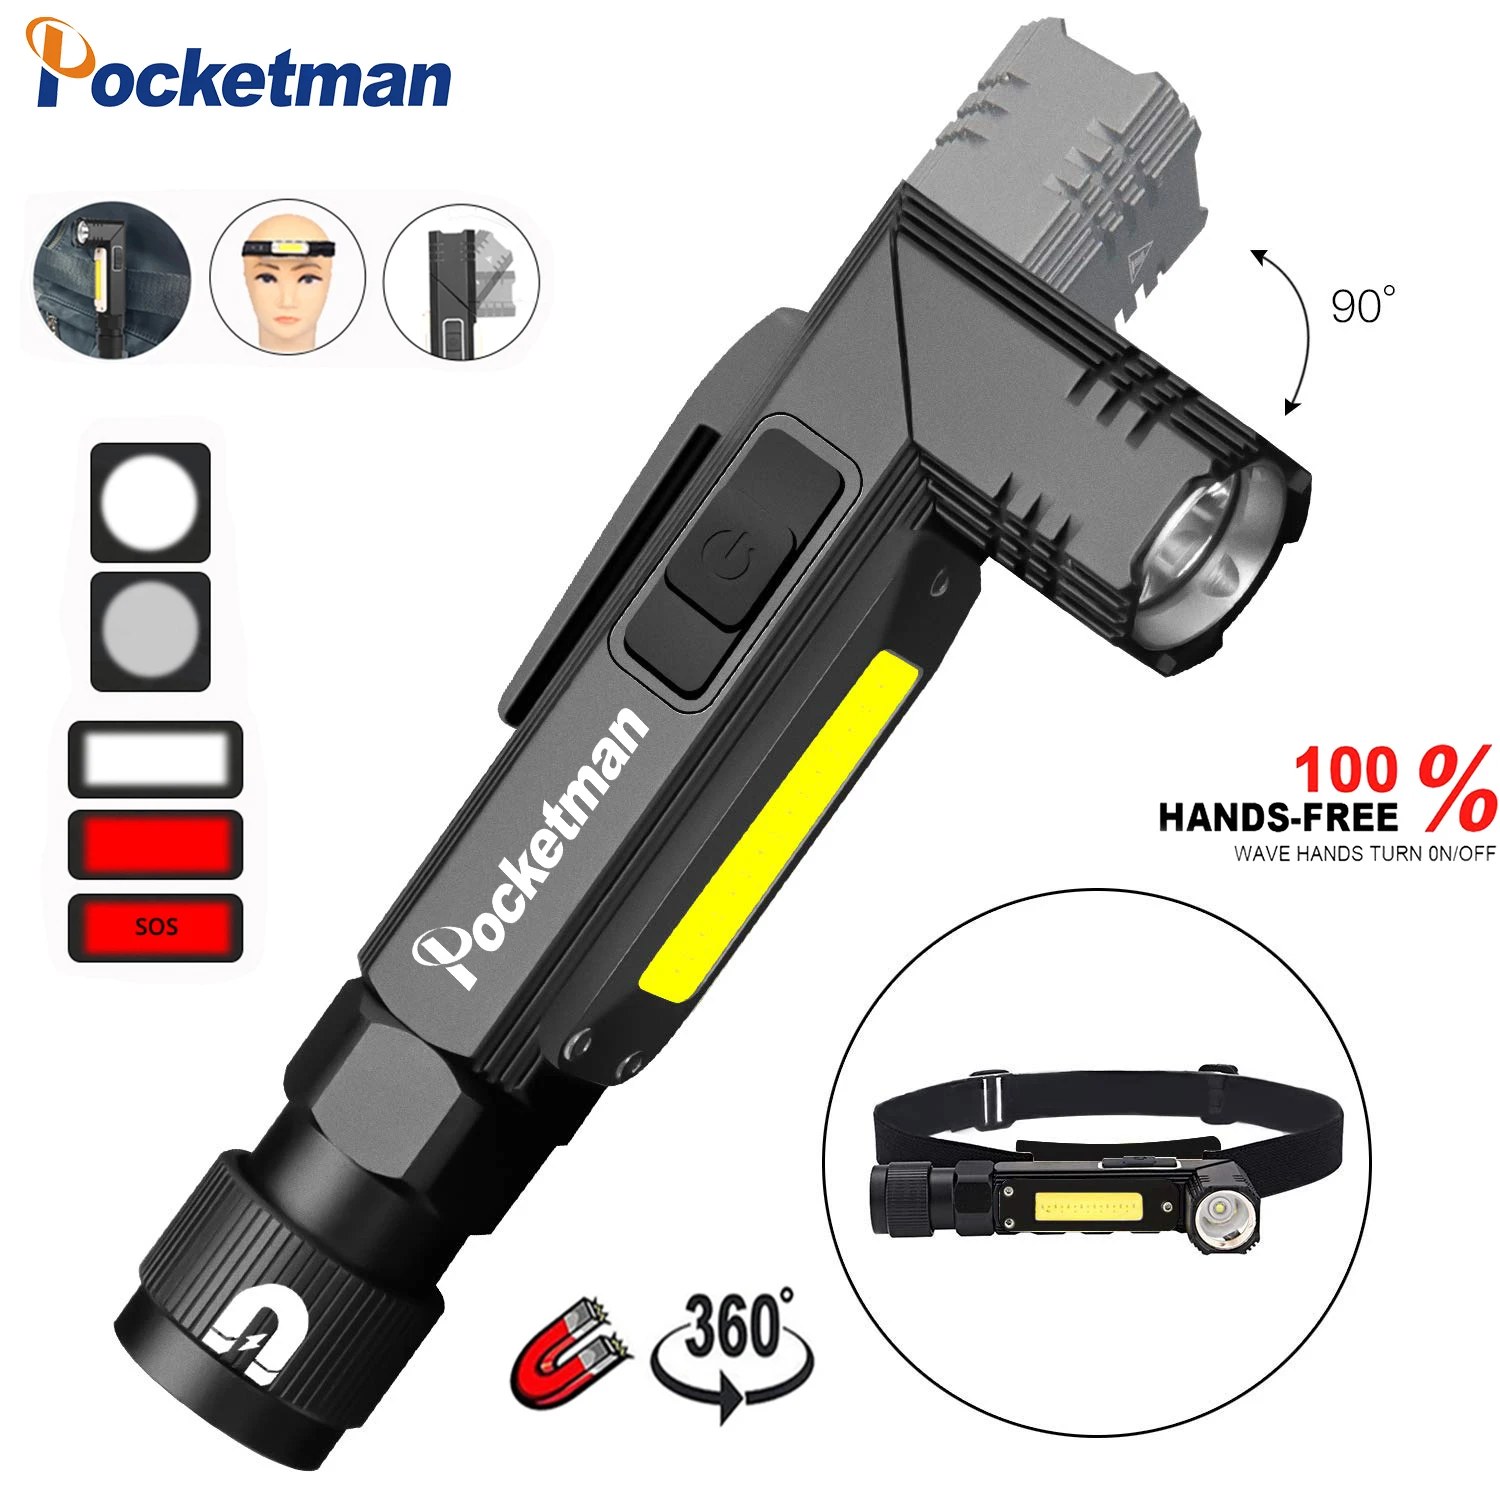 

High lume Handfree Tactical Flashlight Dual Fuel 90 Degree Twist Rotary Clip Rechargeable Super Bright 5 Modes LED Torch Outdoor